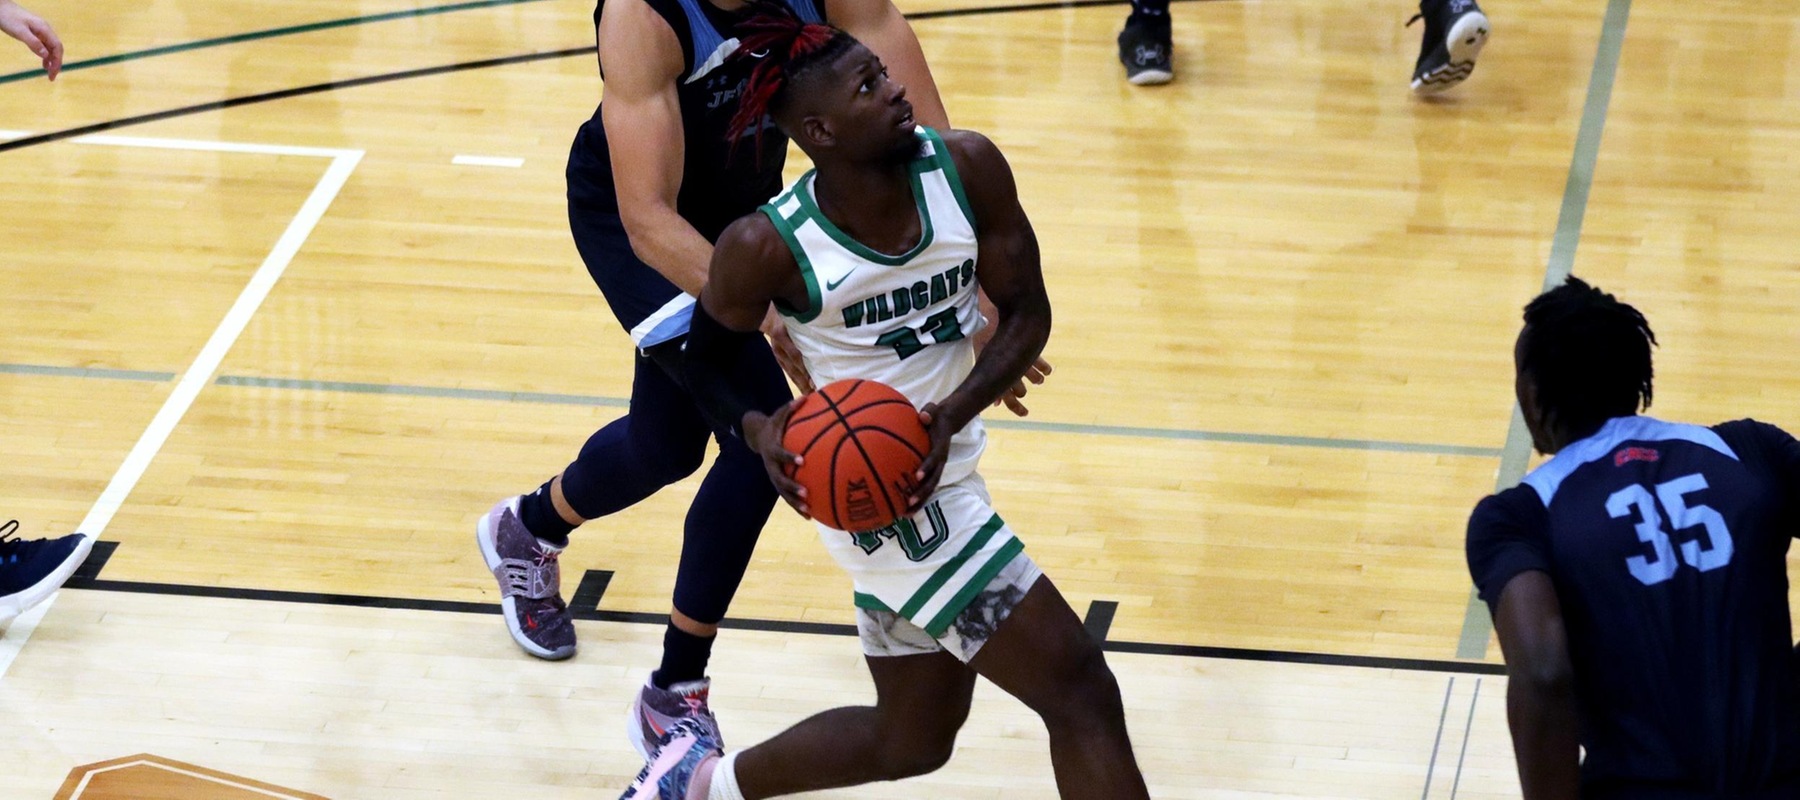 Photo of Amiri Stewart who scored eight points and had four rebounds while playing tenacious defense against Jefferson. Copyright 2022; Wilmington University. All rights reserved. Photo by Dan Lauletta. December 6, 2022 vs. Jefferson.